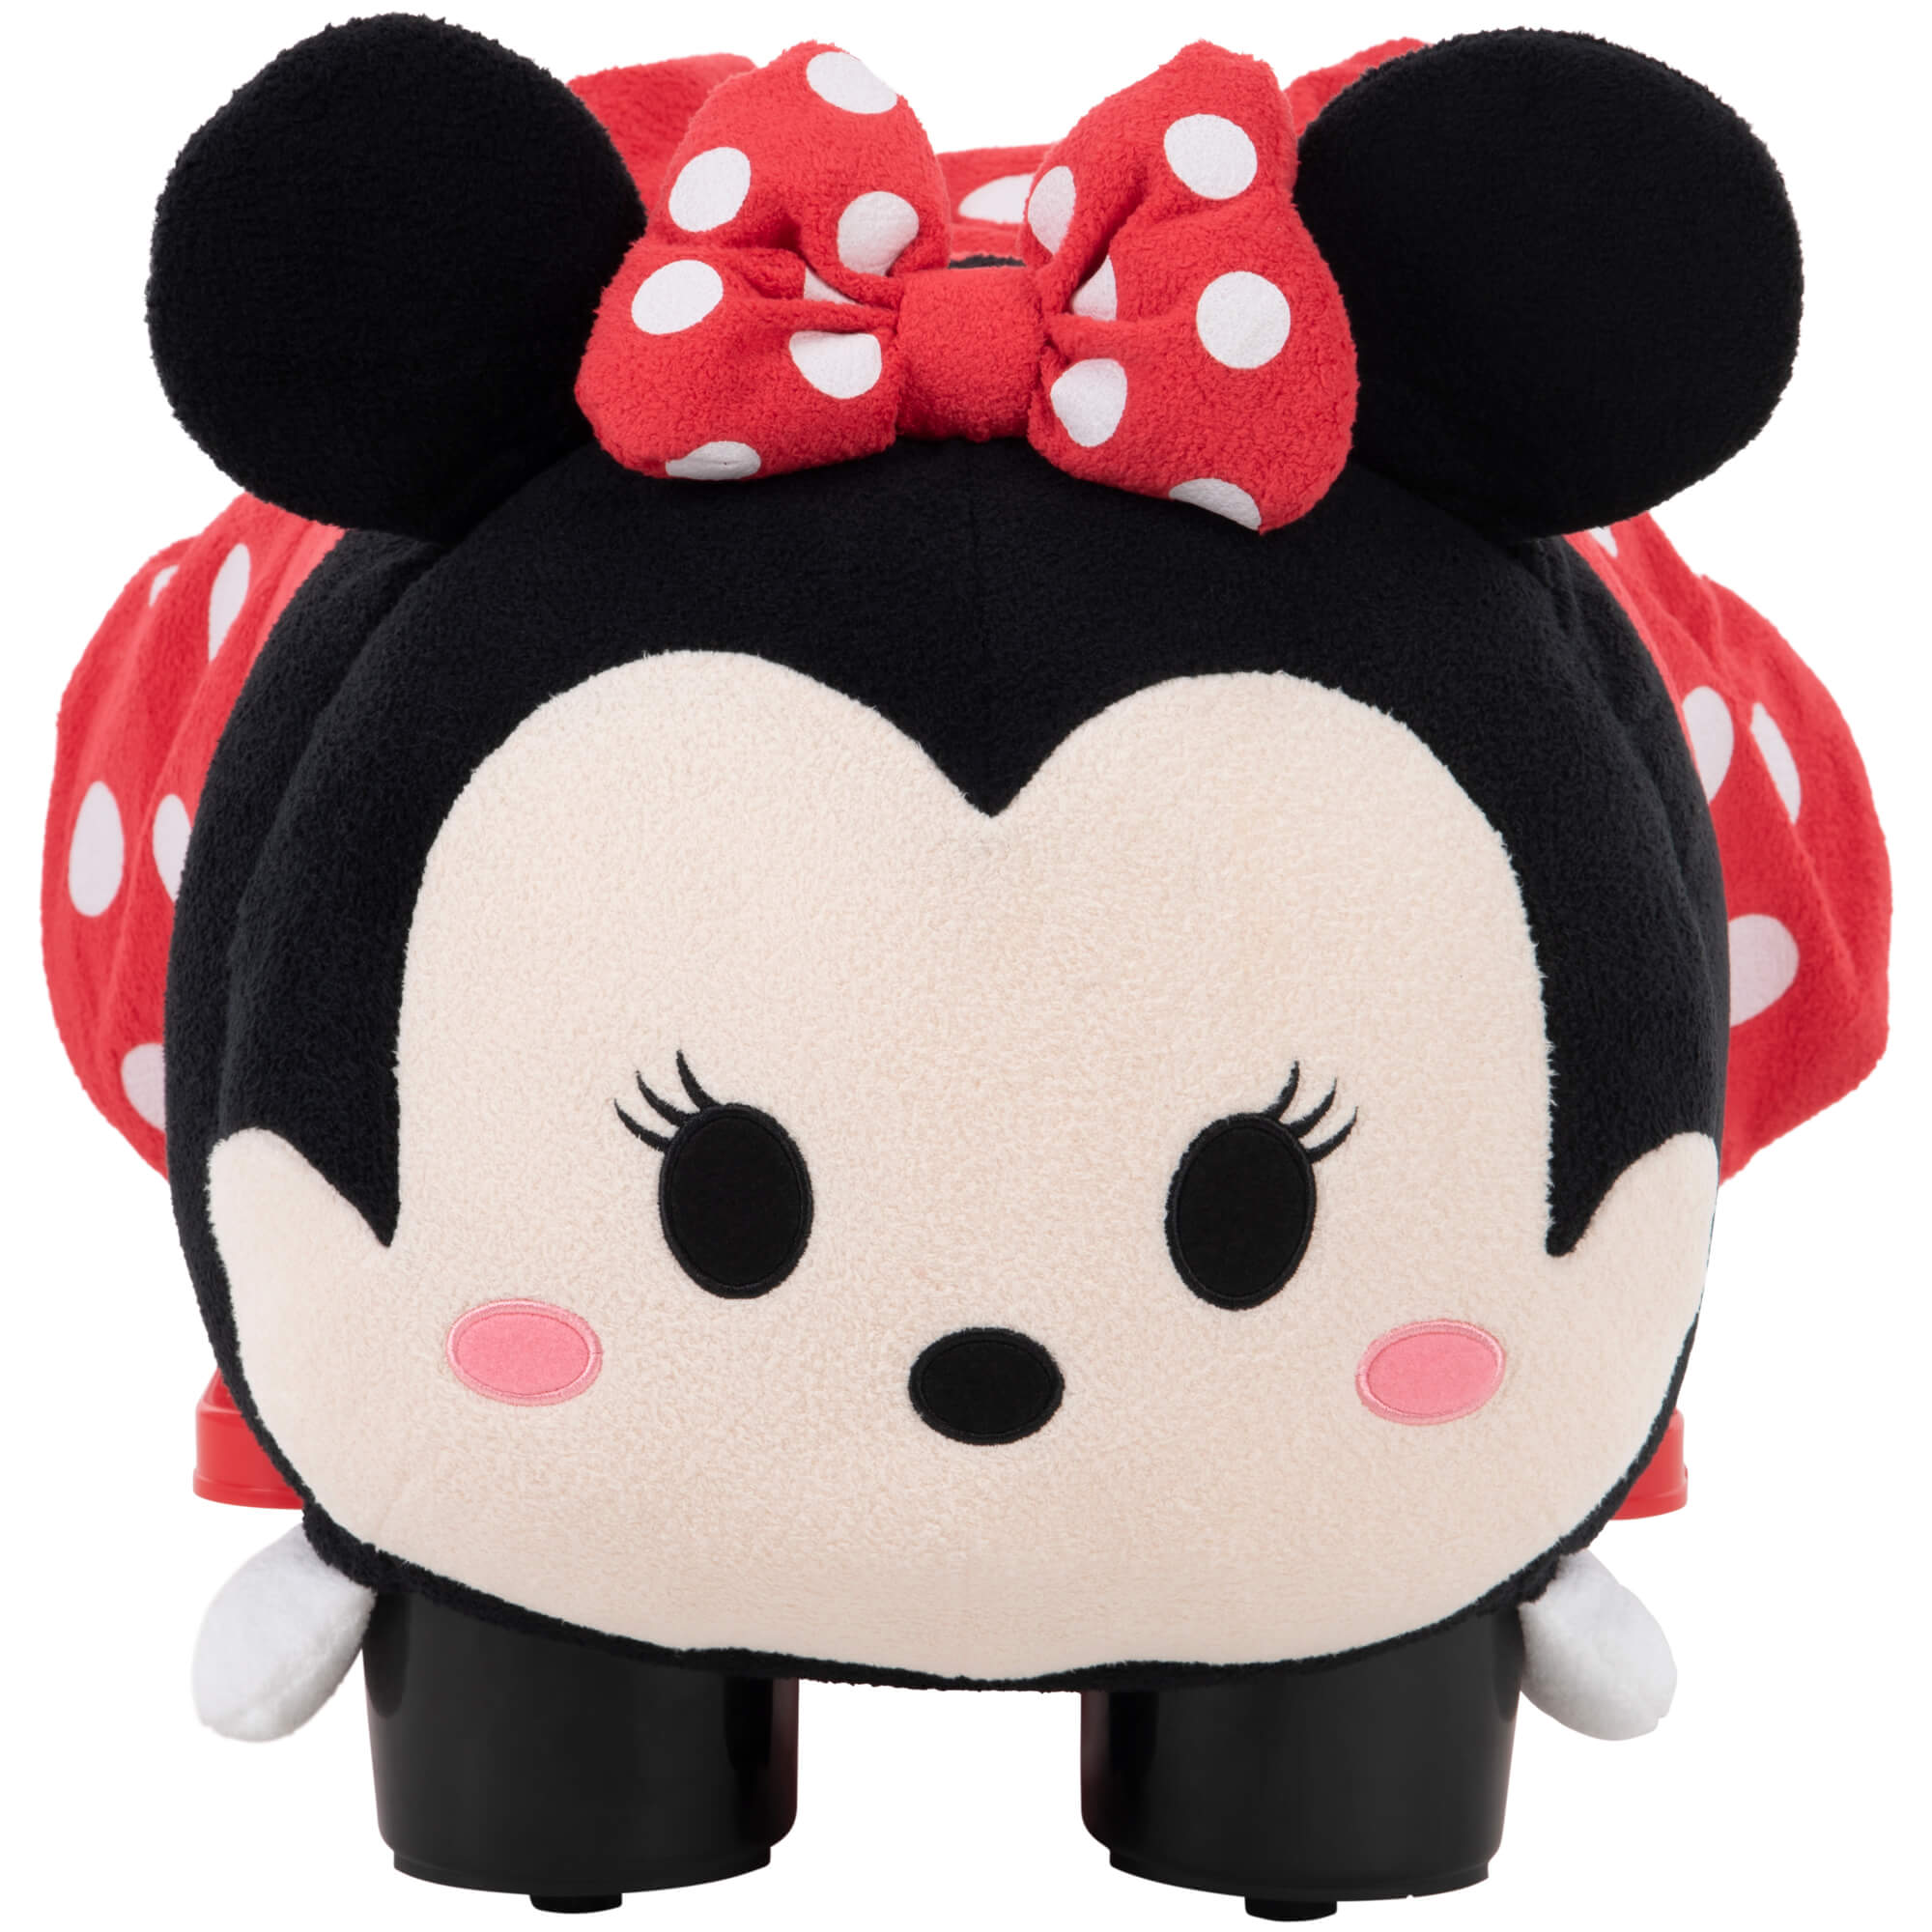 Disney Minnie Mouse Tsum Tsum Ride-on Plush Toy by Huffy - image 3 of 10